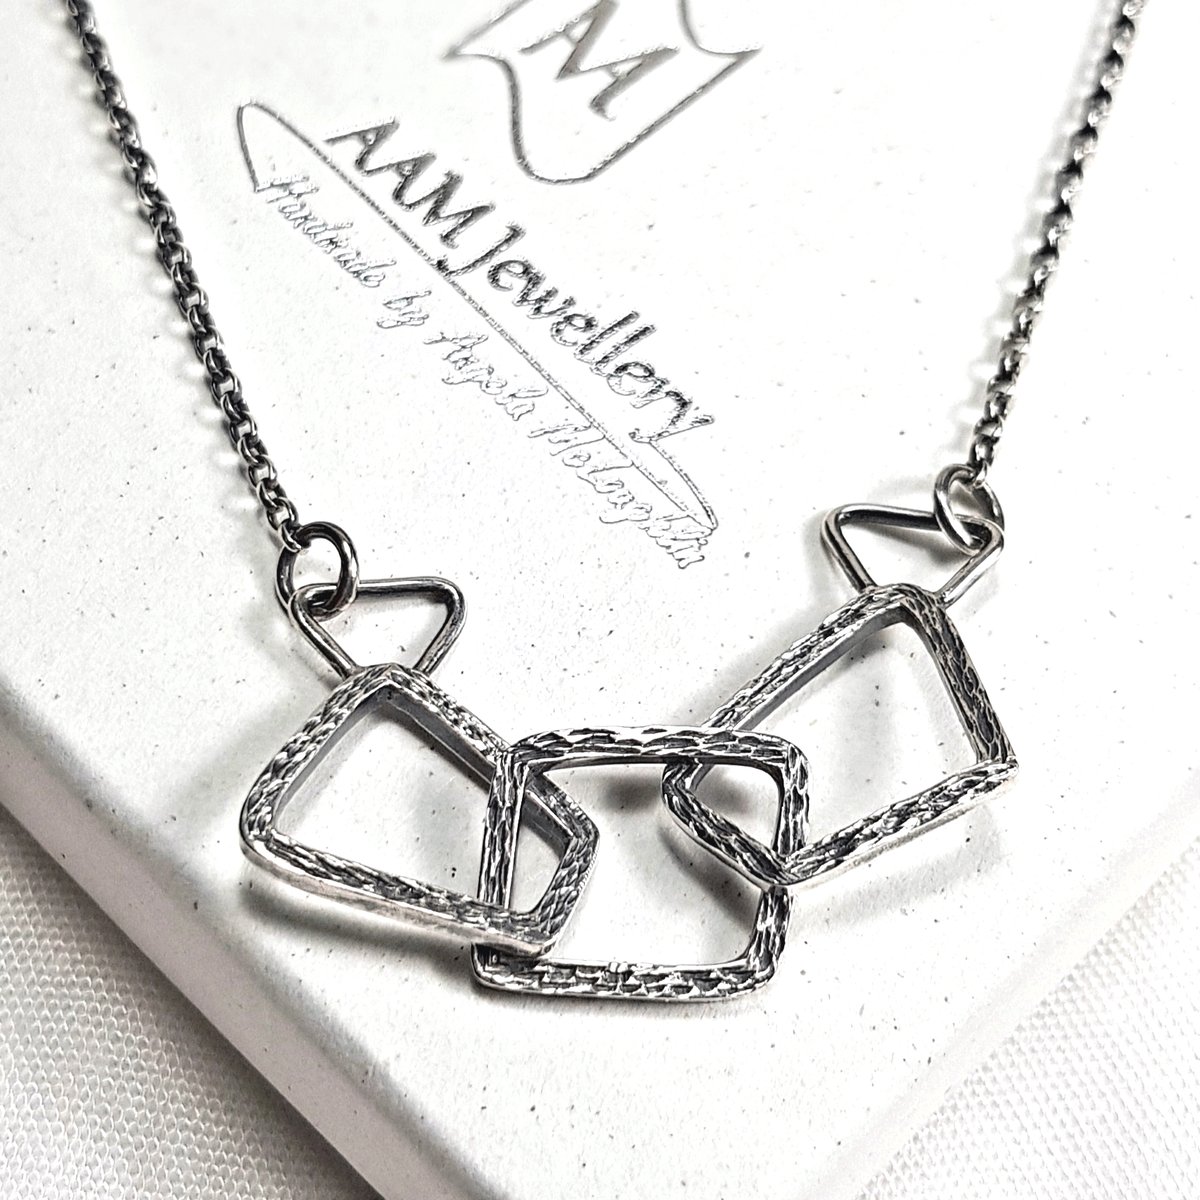 Image of Chunky Sterling Silver Necklace, Handmade Geometric Link Chain, Statement Necklace